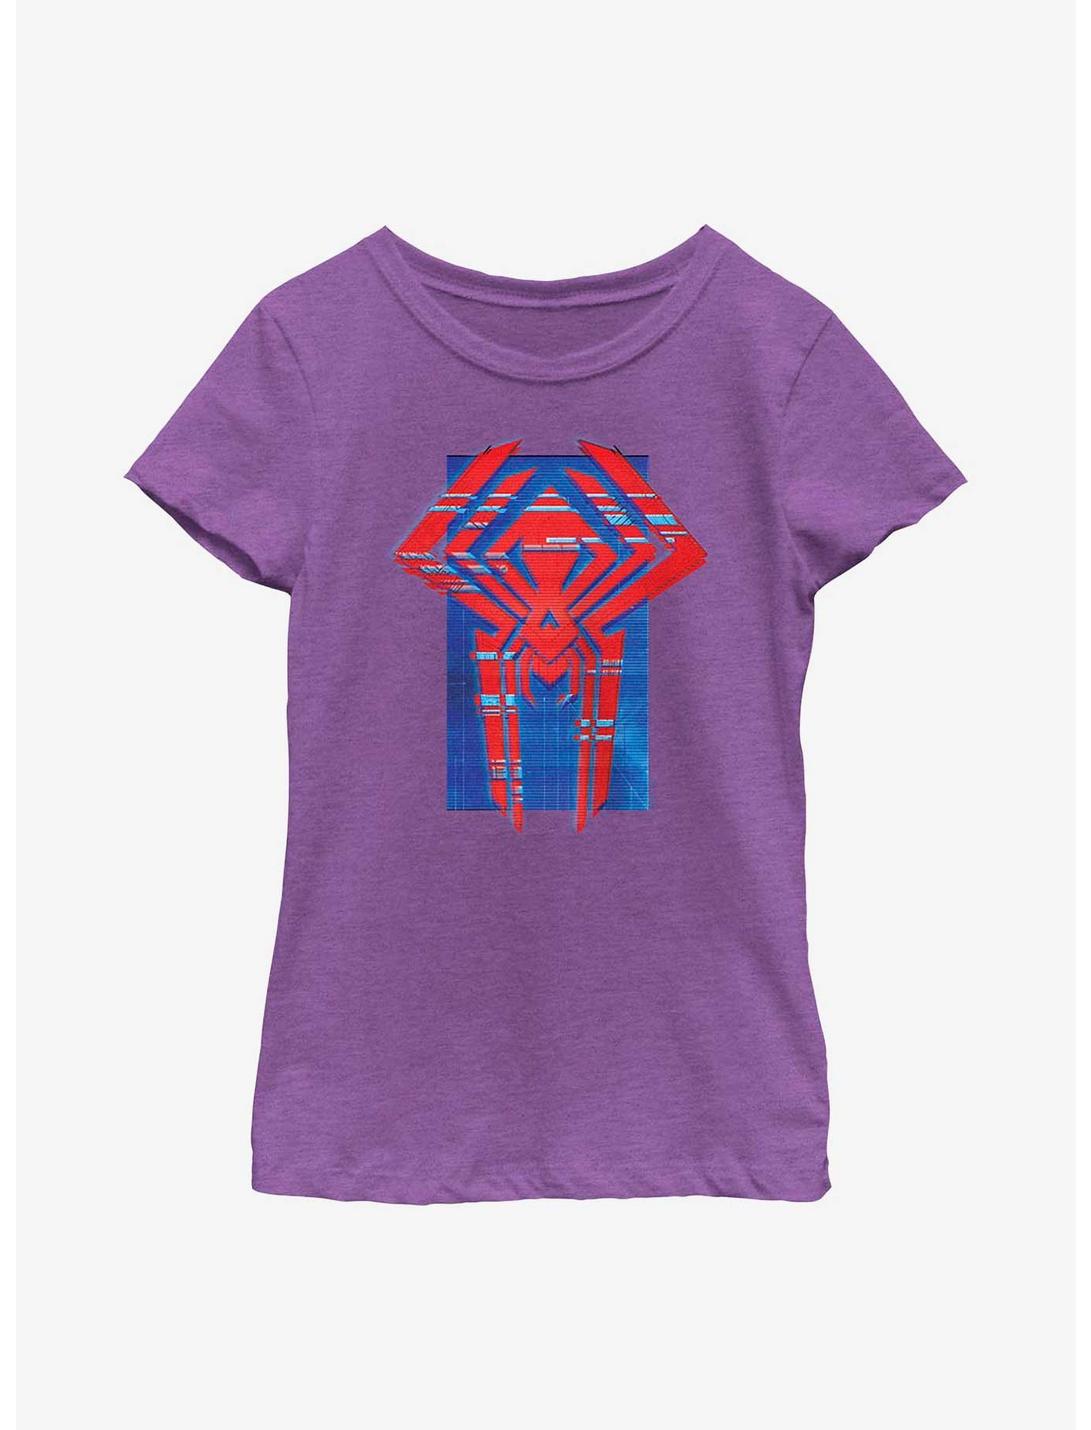 Marvel Spider-Man: Across the Spider-Verse Glitchy Miguel O'Hara Logo Youth Girls T-Shirt, PURPLE BERRY, hi-res